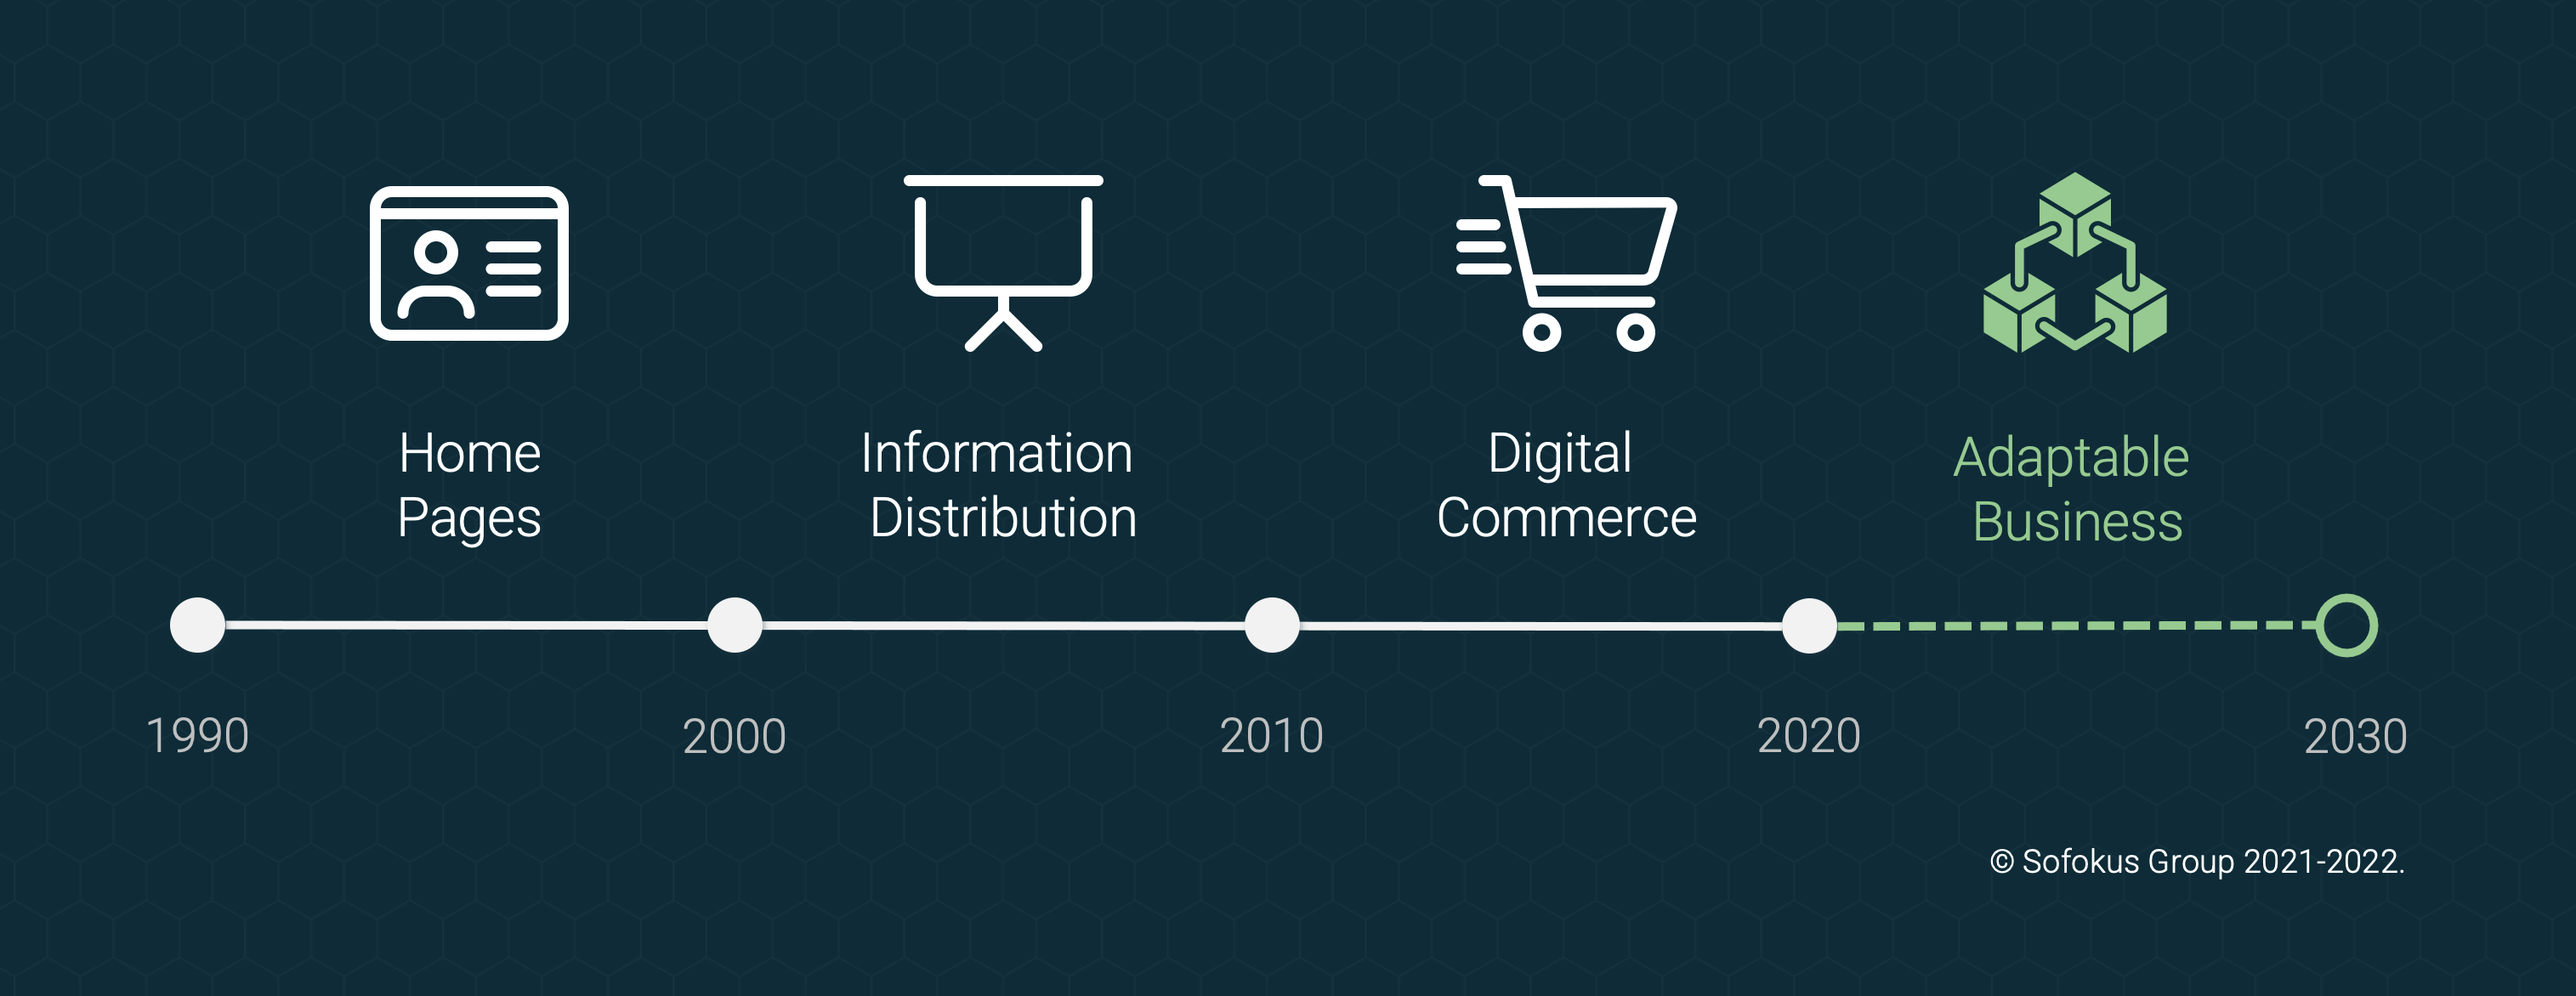 An illustration of the decades of digital business development.